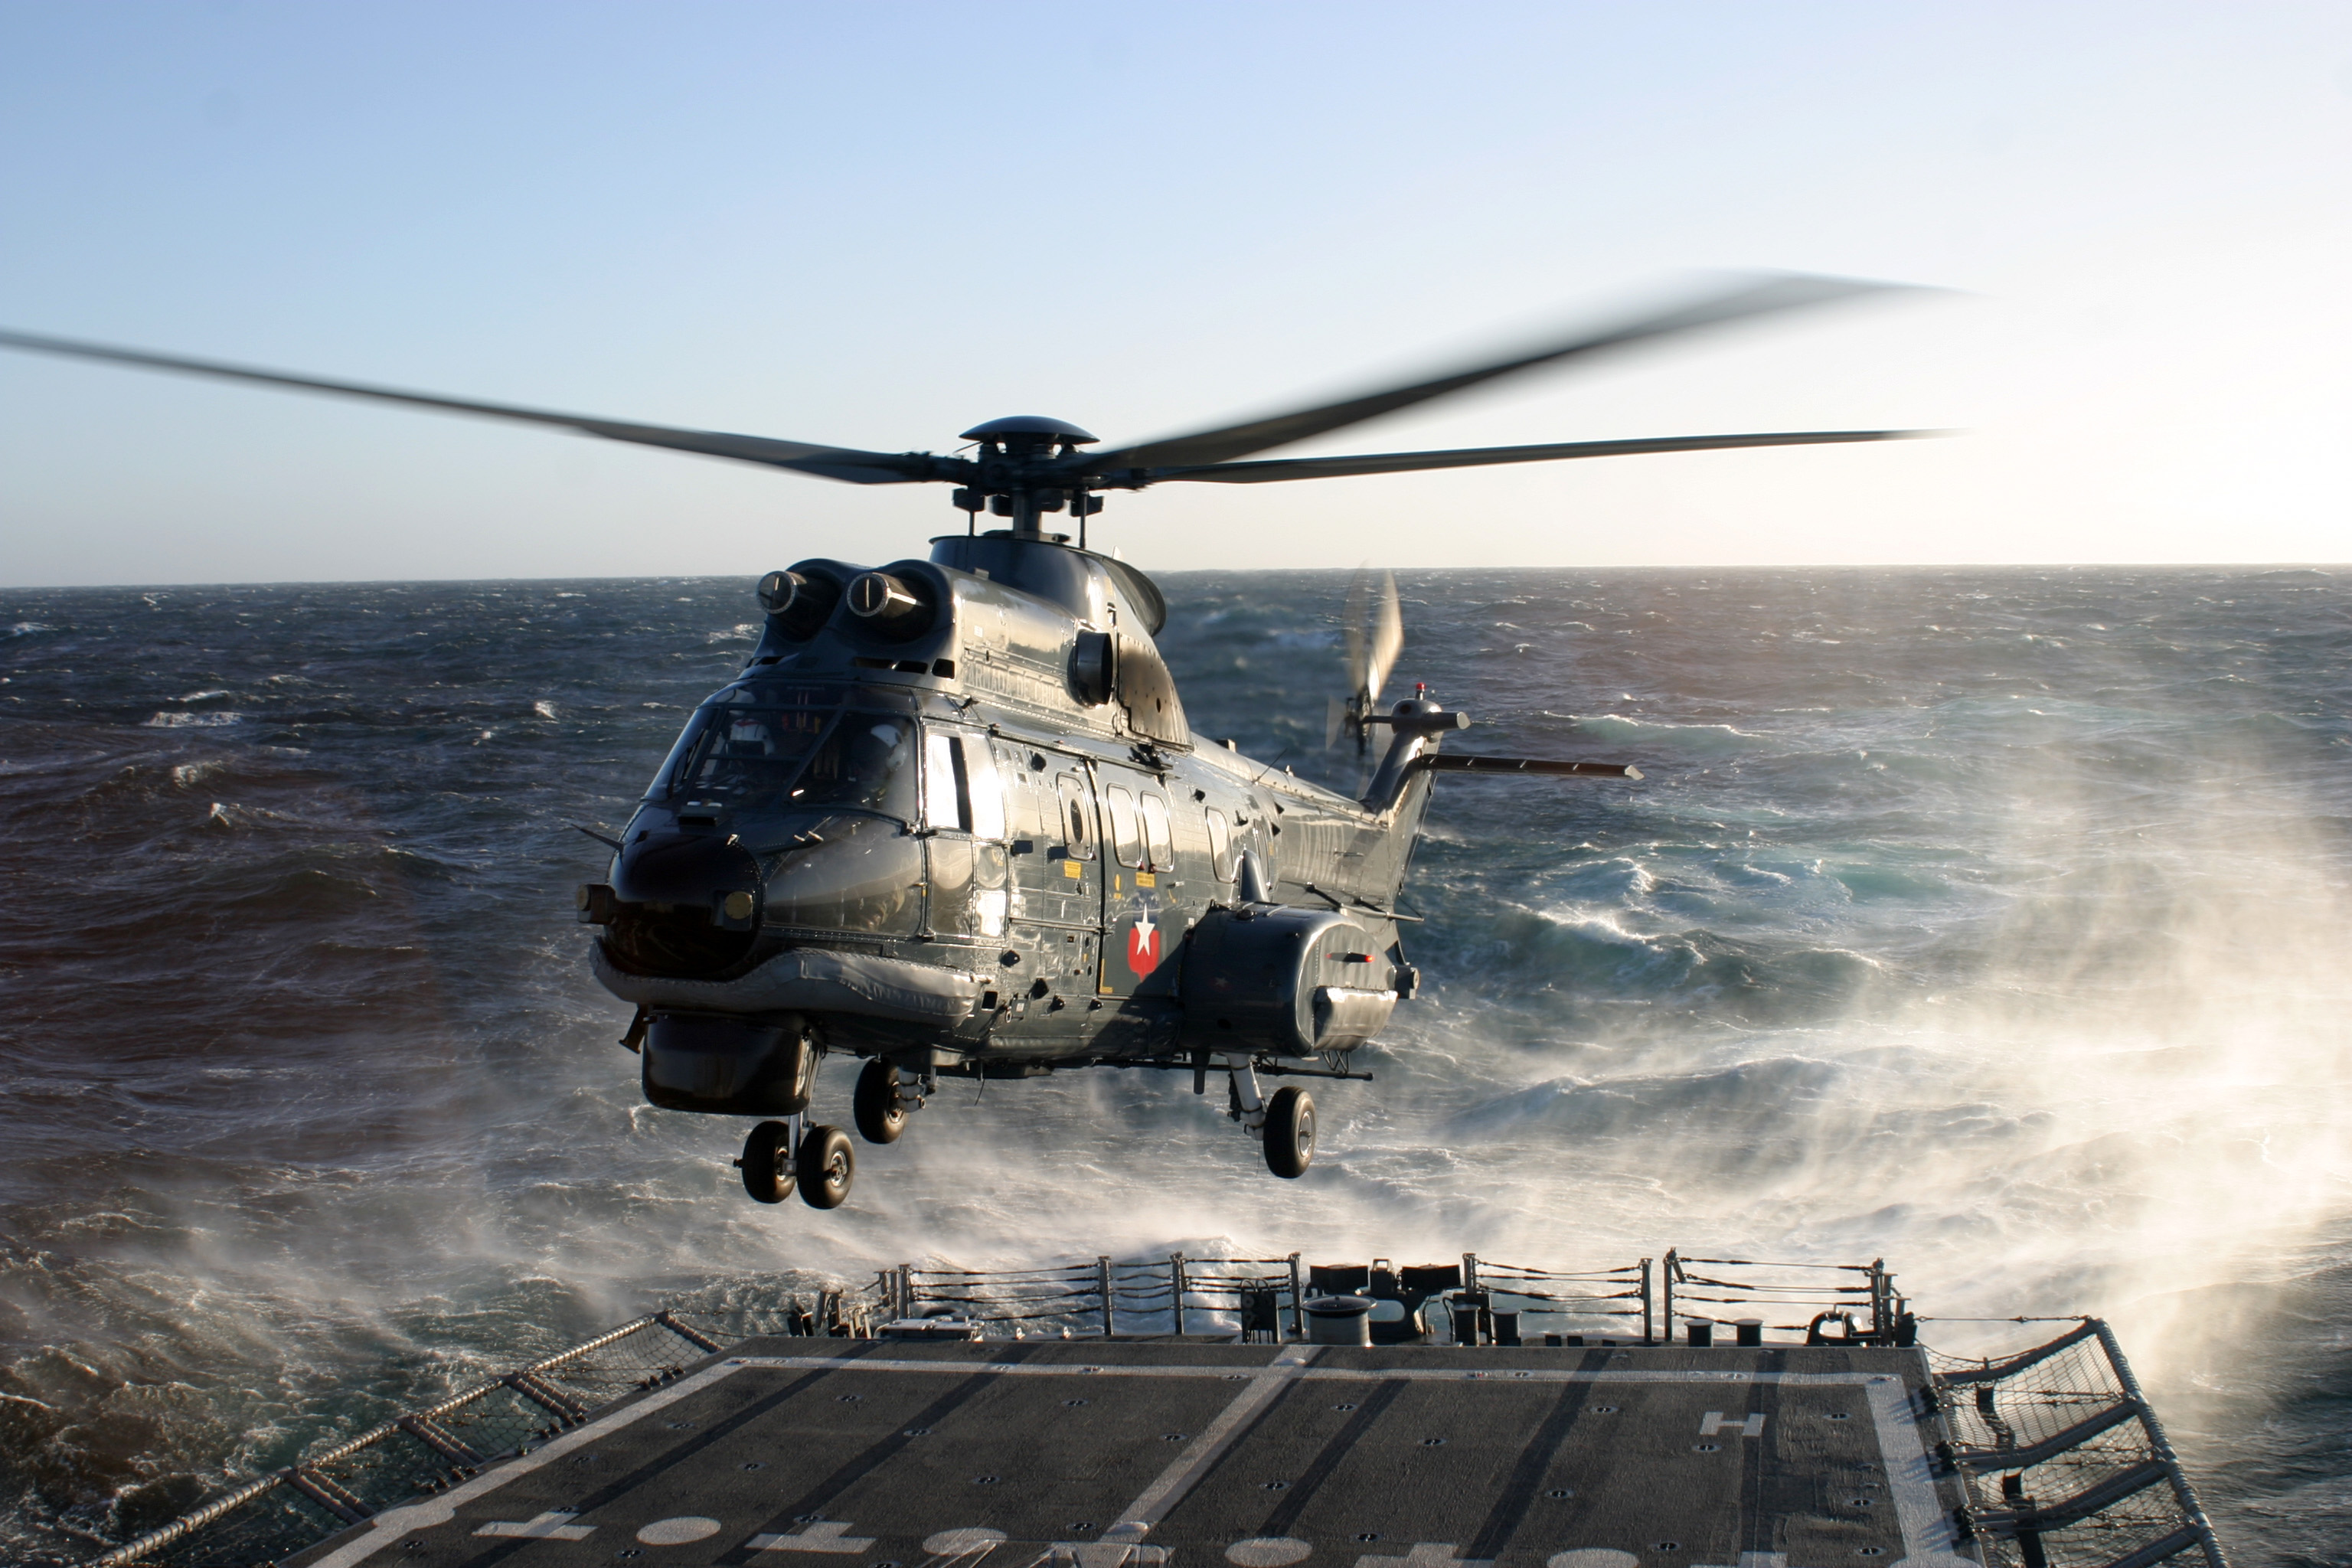 US Navy 110630-N-MN502-003 A Chilean navy SH-32 Super Puma helicopter prepares to land aboard USS Boone (FFG 28) during the Pacific phase of UNITAS